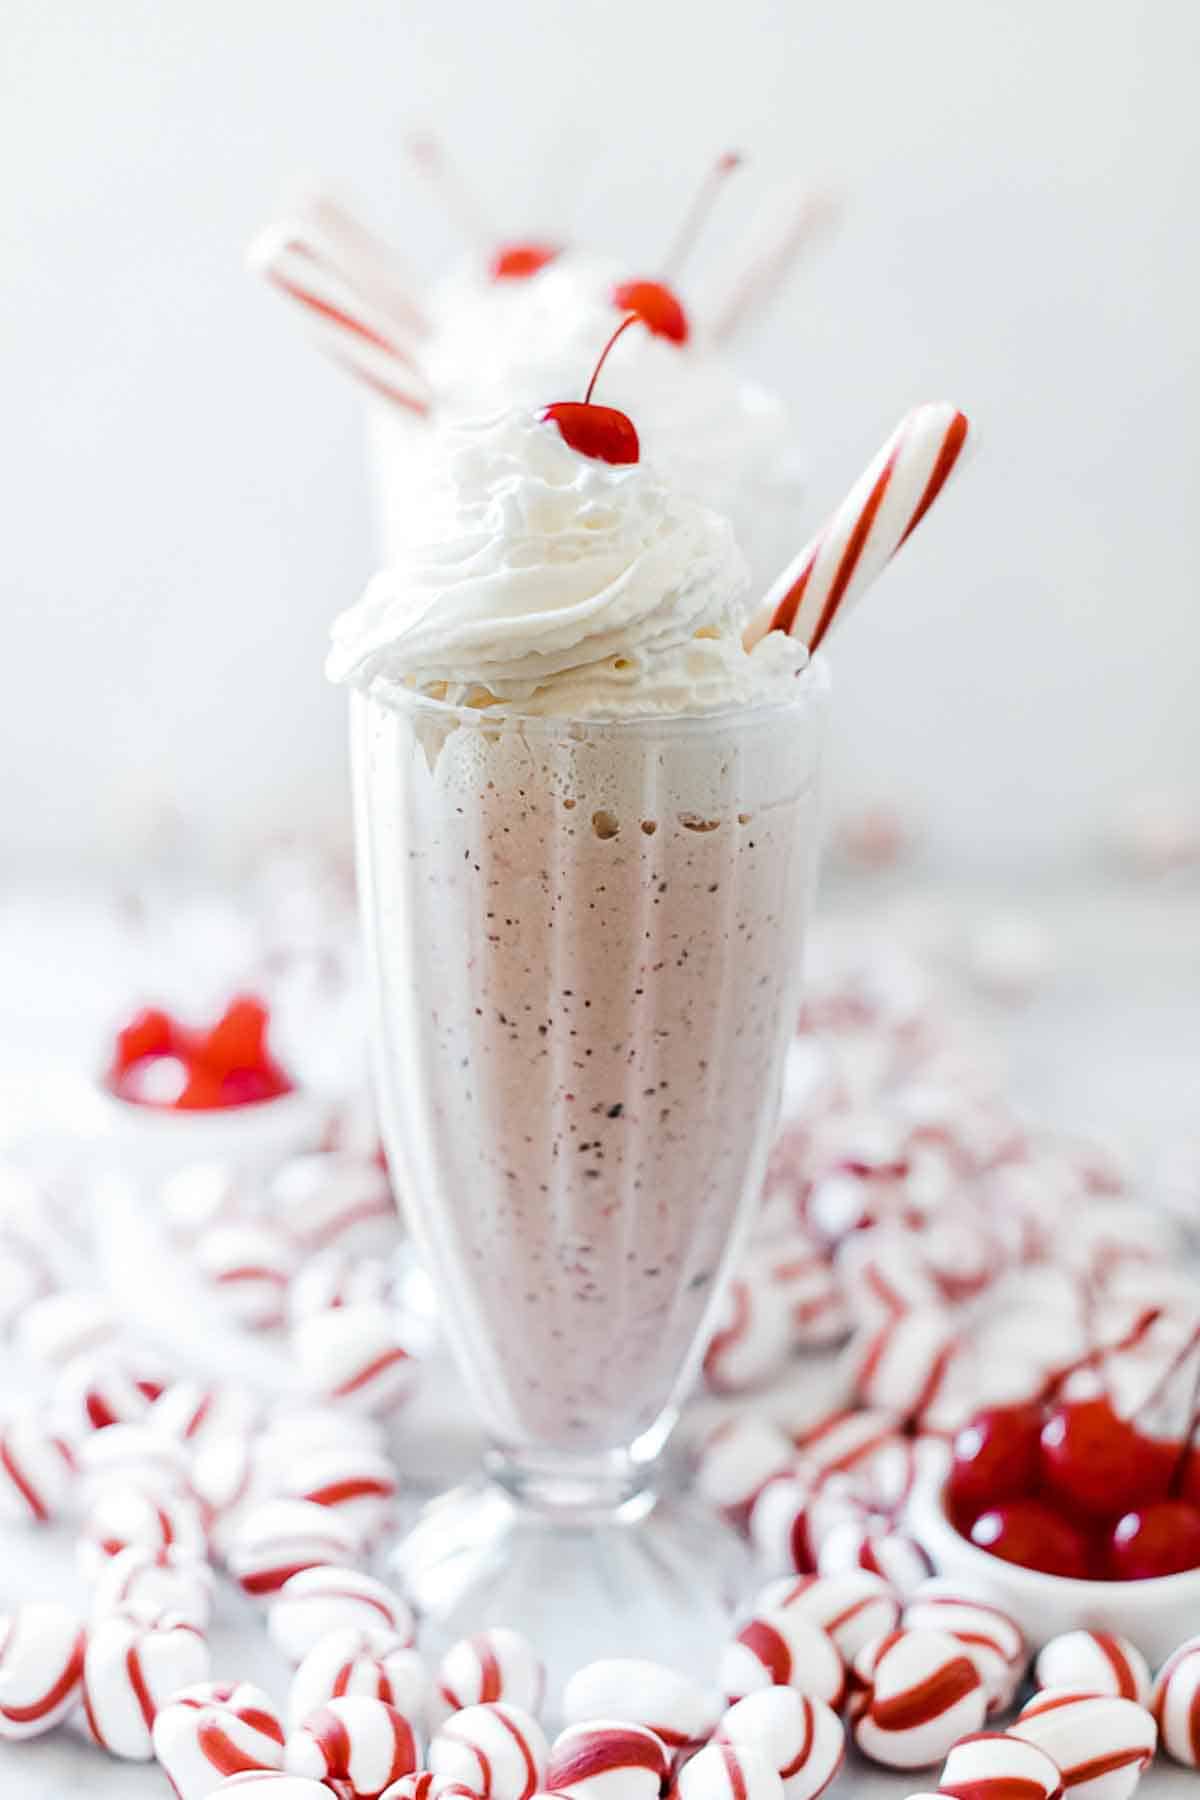 Peppermint shake in sundae glasses. They are lined up and garnished with whipped cream and a cherry.